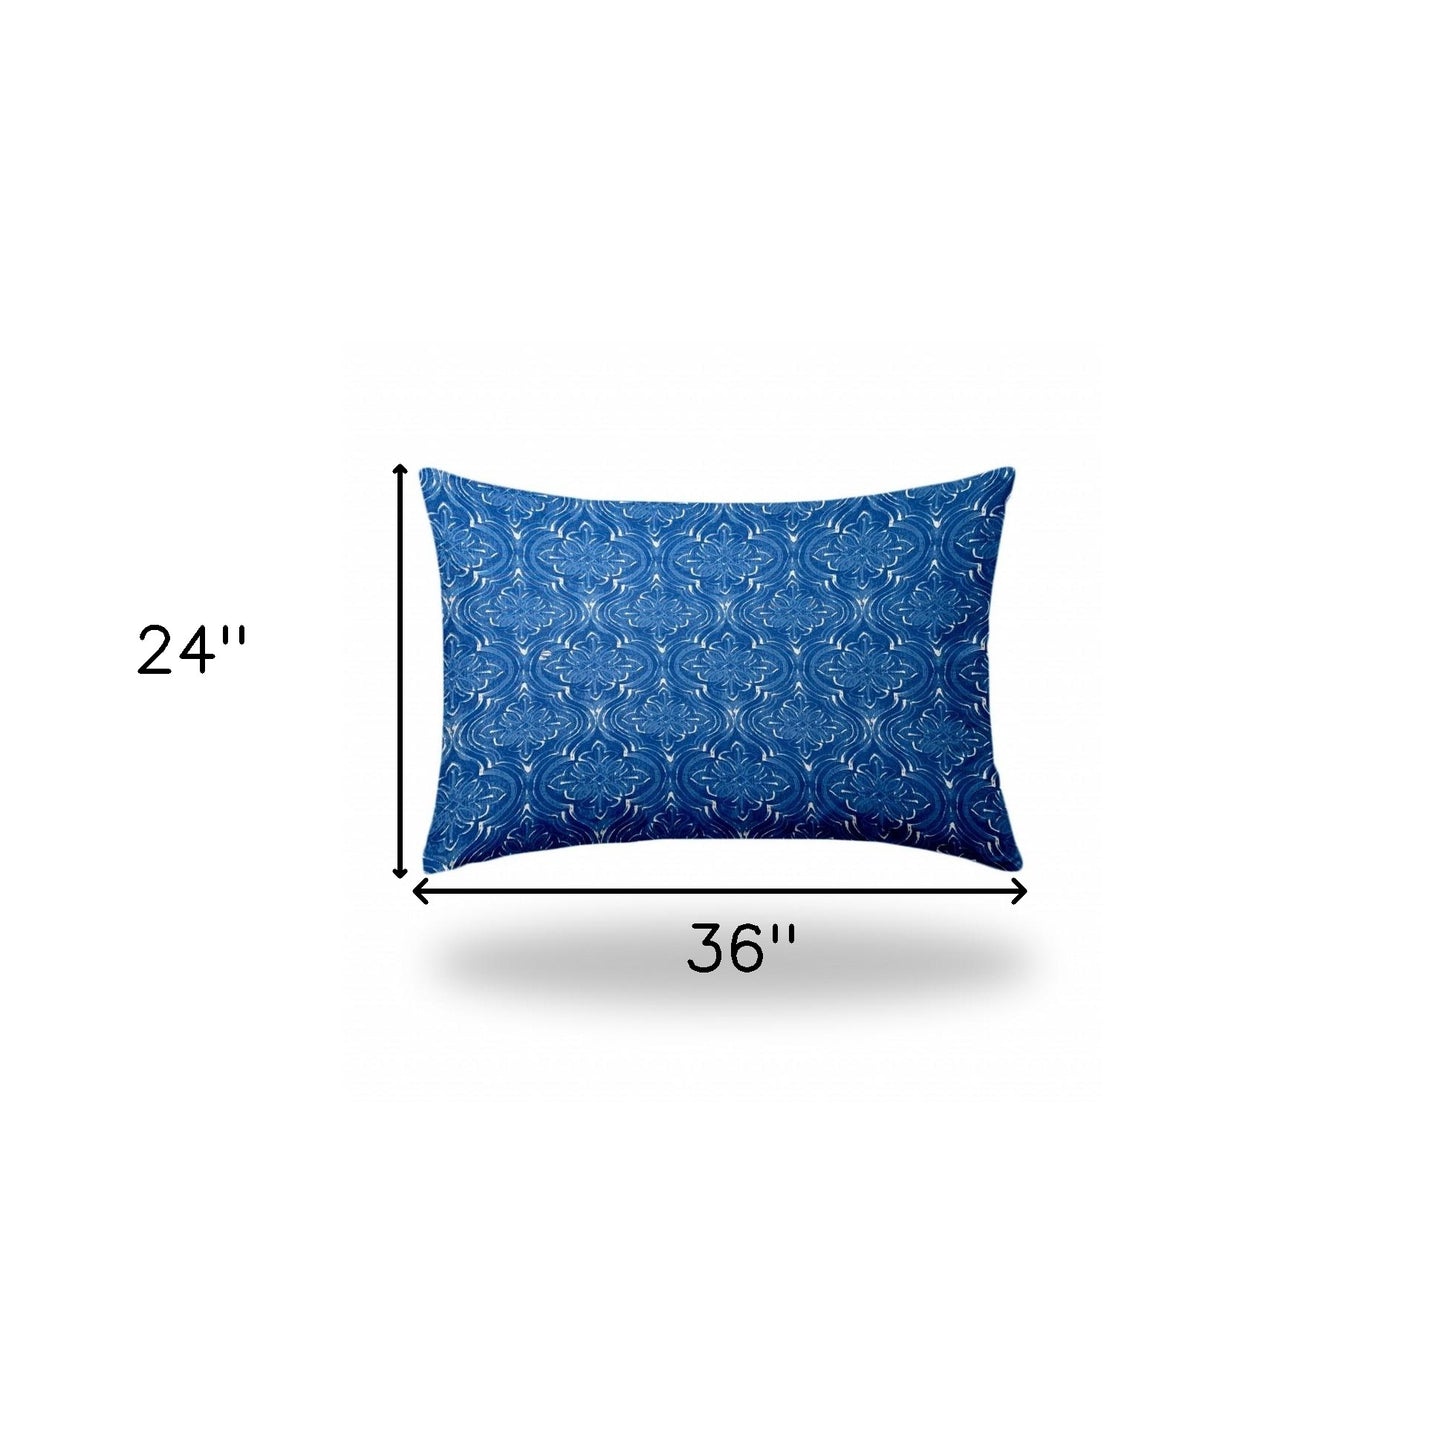 24" X 36" Blue And White Enveloped Ikat Lumbar Indoor Outdoor Pillow Cover